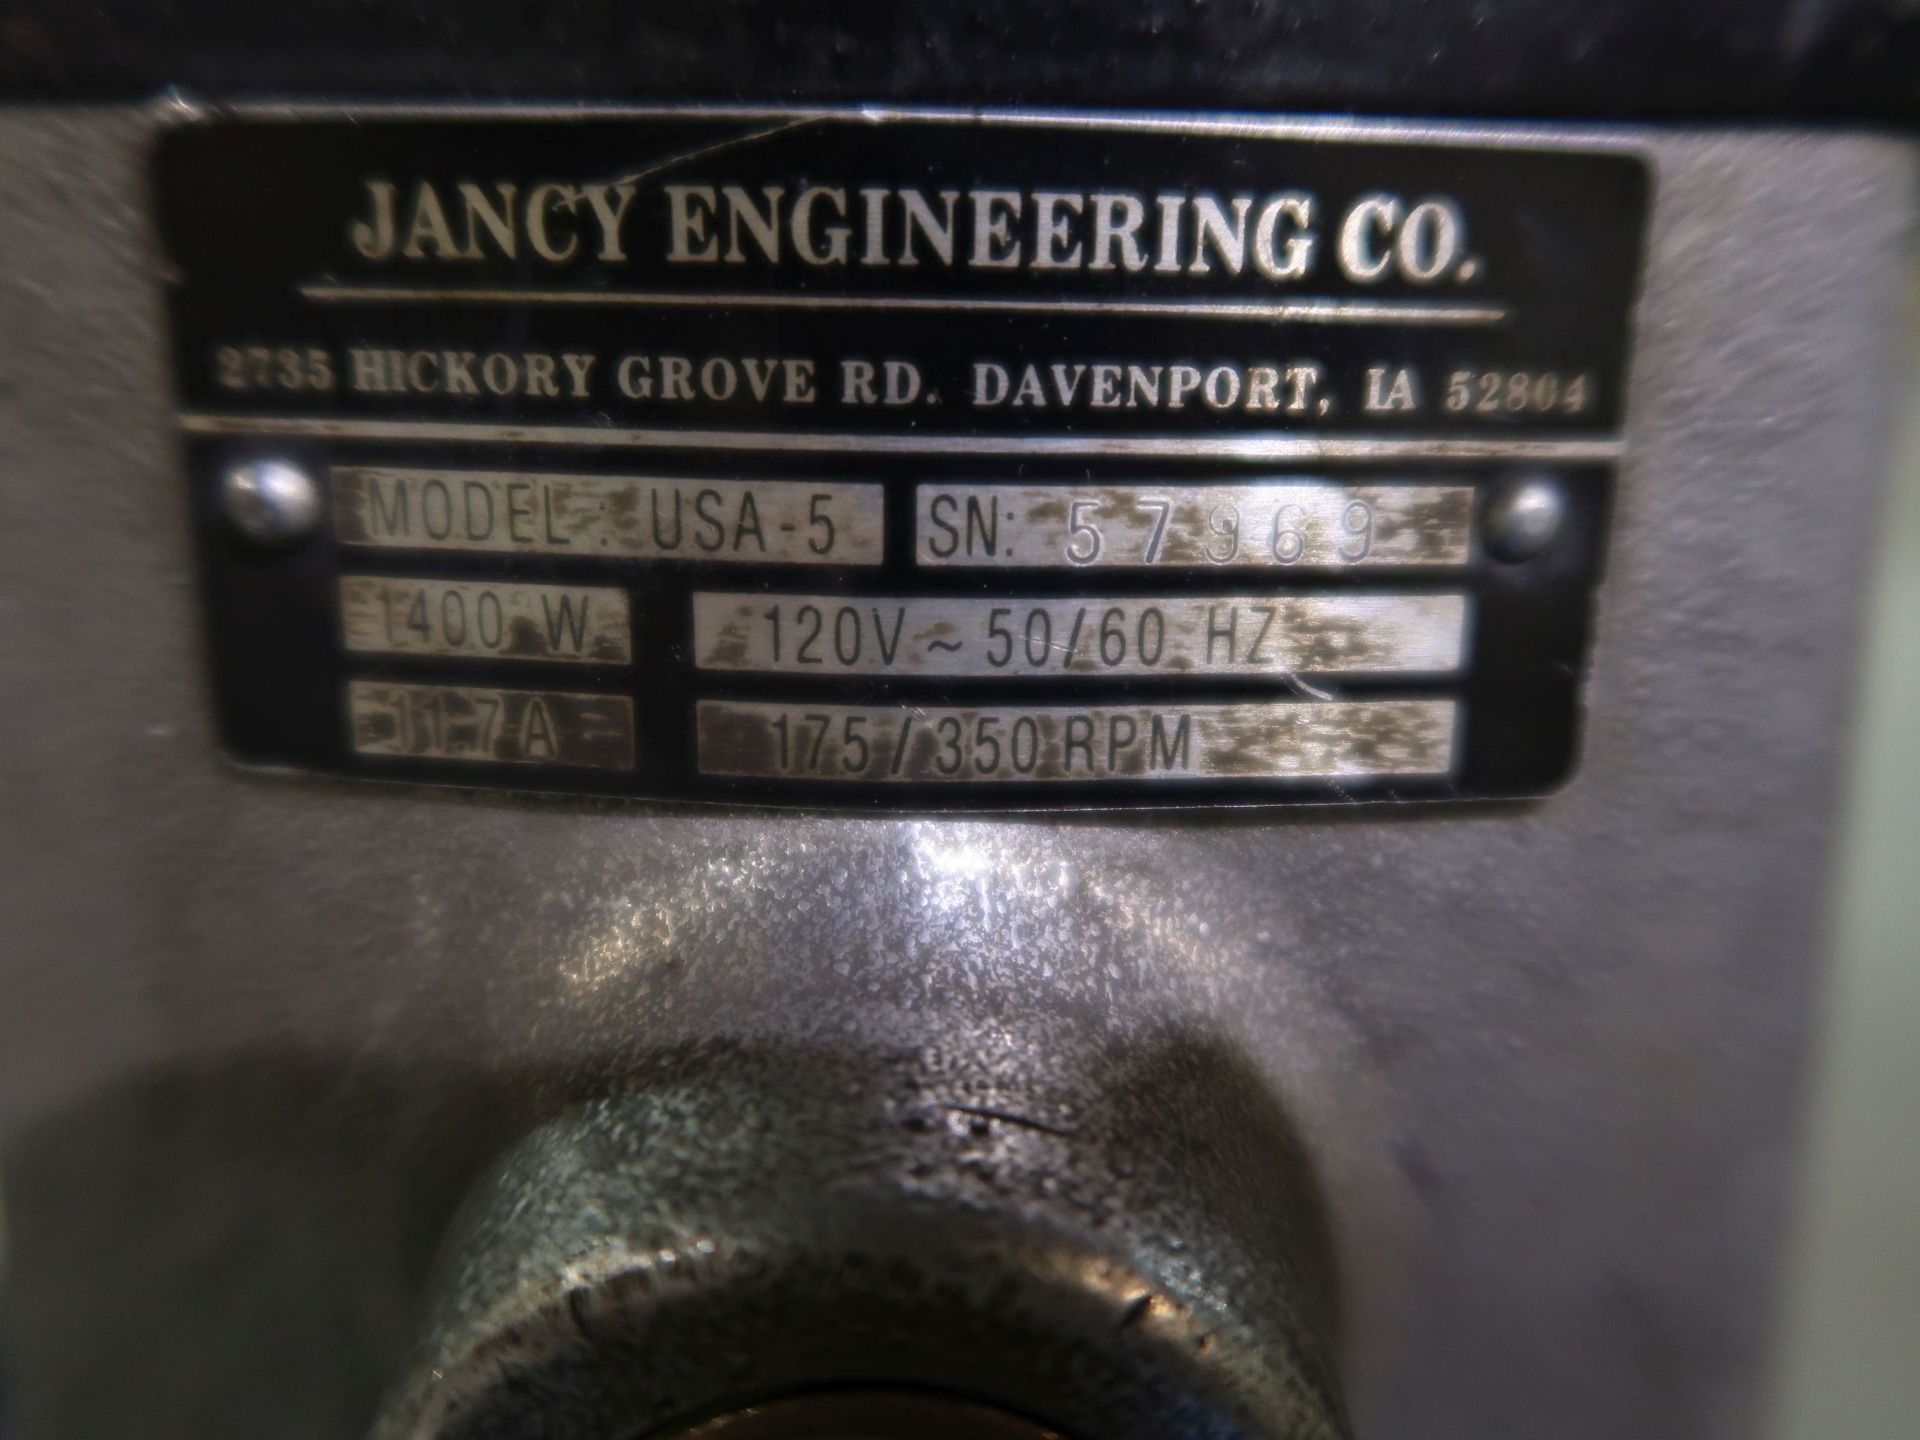 JANCY ENGINEERING MODEL USA-5000 "SLUGGER" HEAVY DUTY MAGNETIC BASE DRILL; S/N 57969 - Image 3 of 3